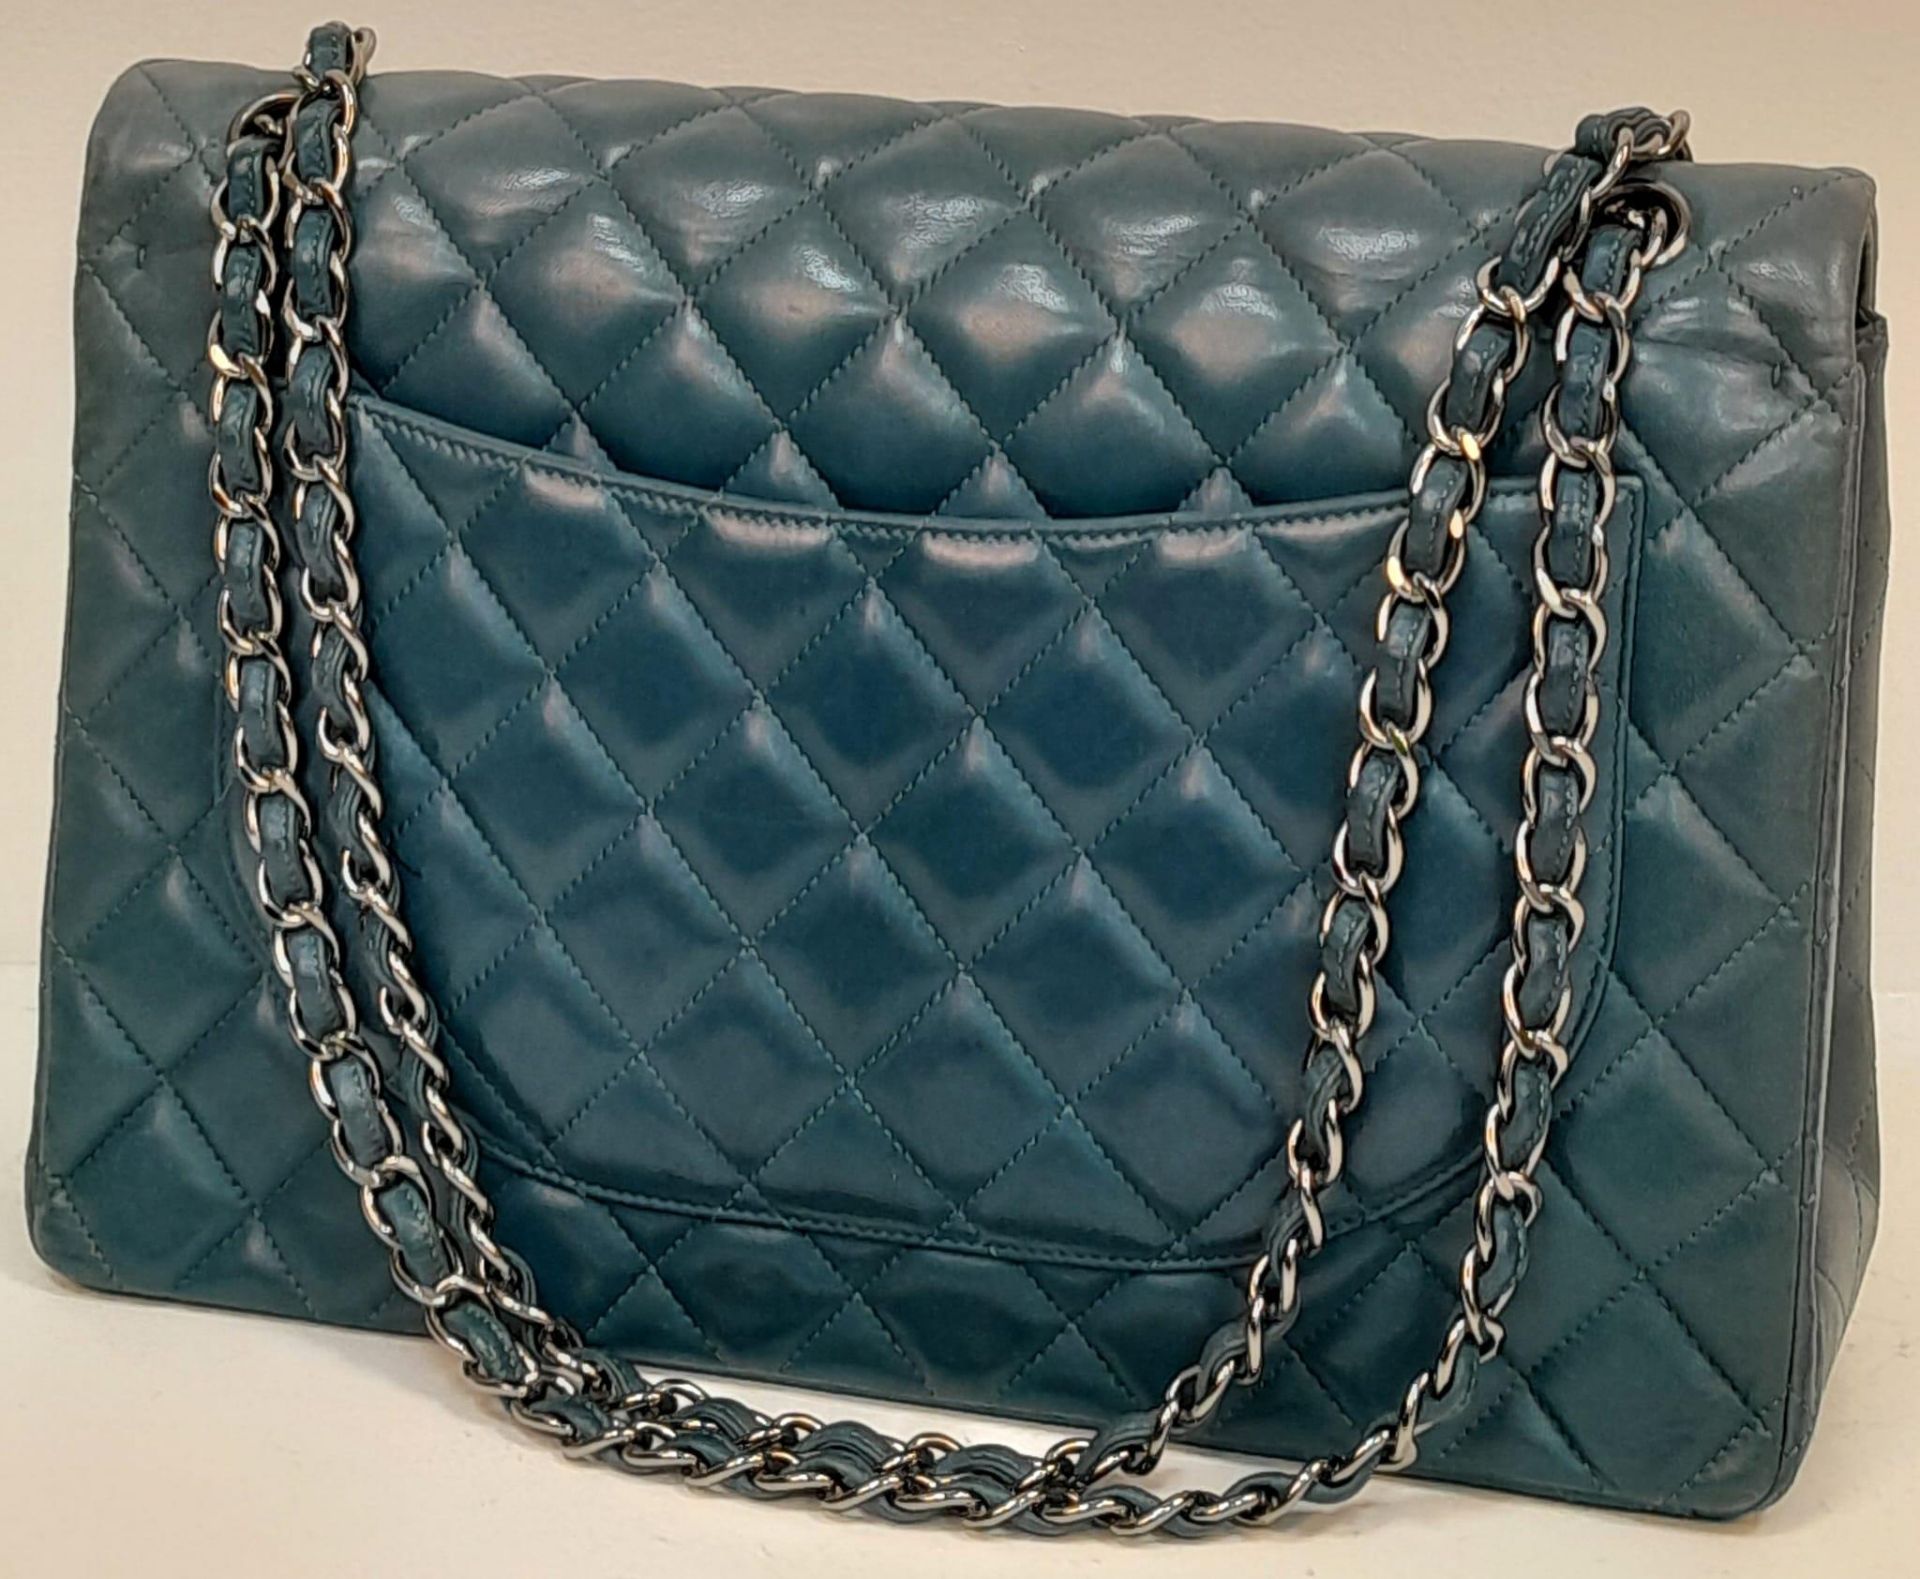 A Chanel Teal Jumbo Classic Double Flap Bag. Quilted leather exterior with silver-toned hardware, - Bild 4 aus 14